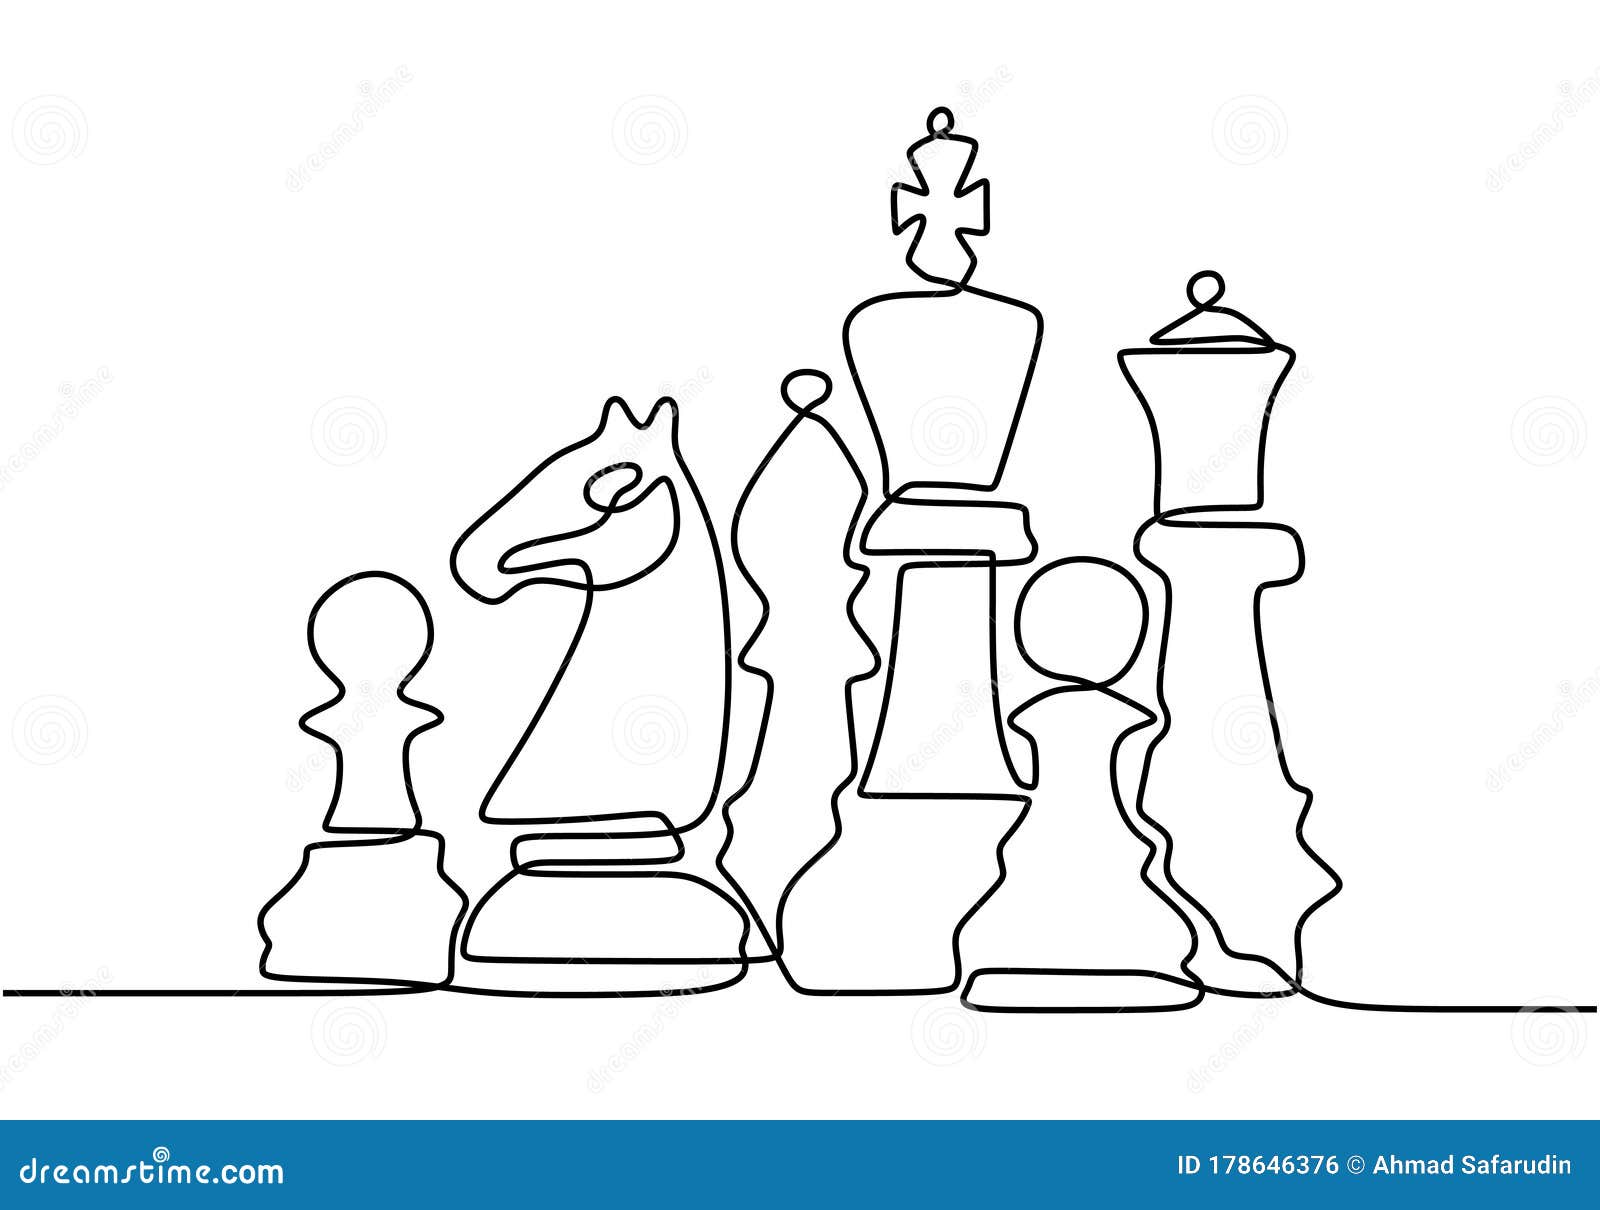 Download HD Queen Chess Piece Royalty Free Vector Clip Art